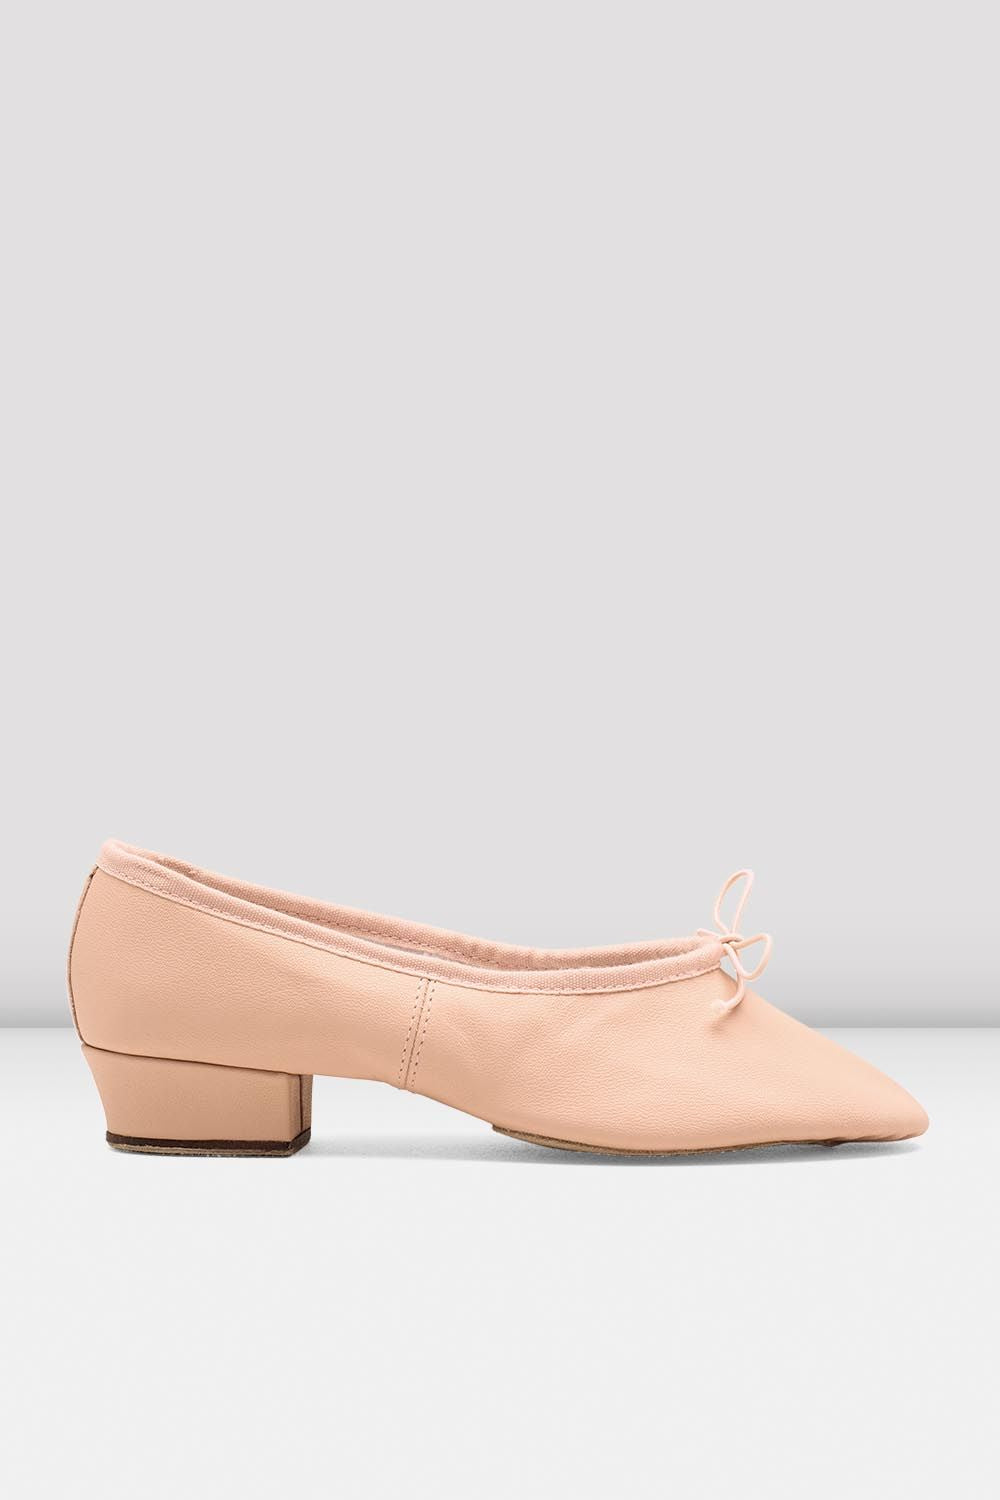 BLOCH Ladies Paris Leather Teaching Shoes, Pink Leather